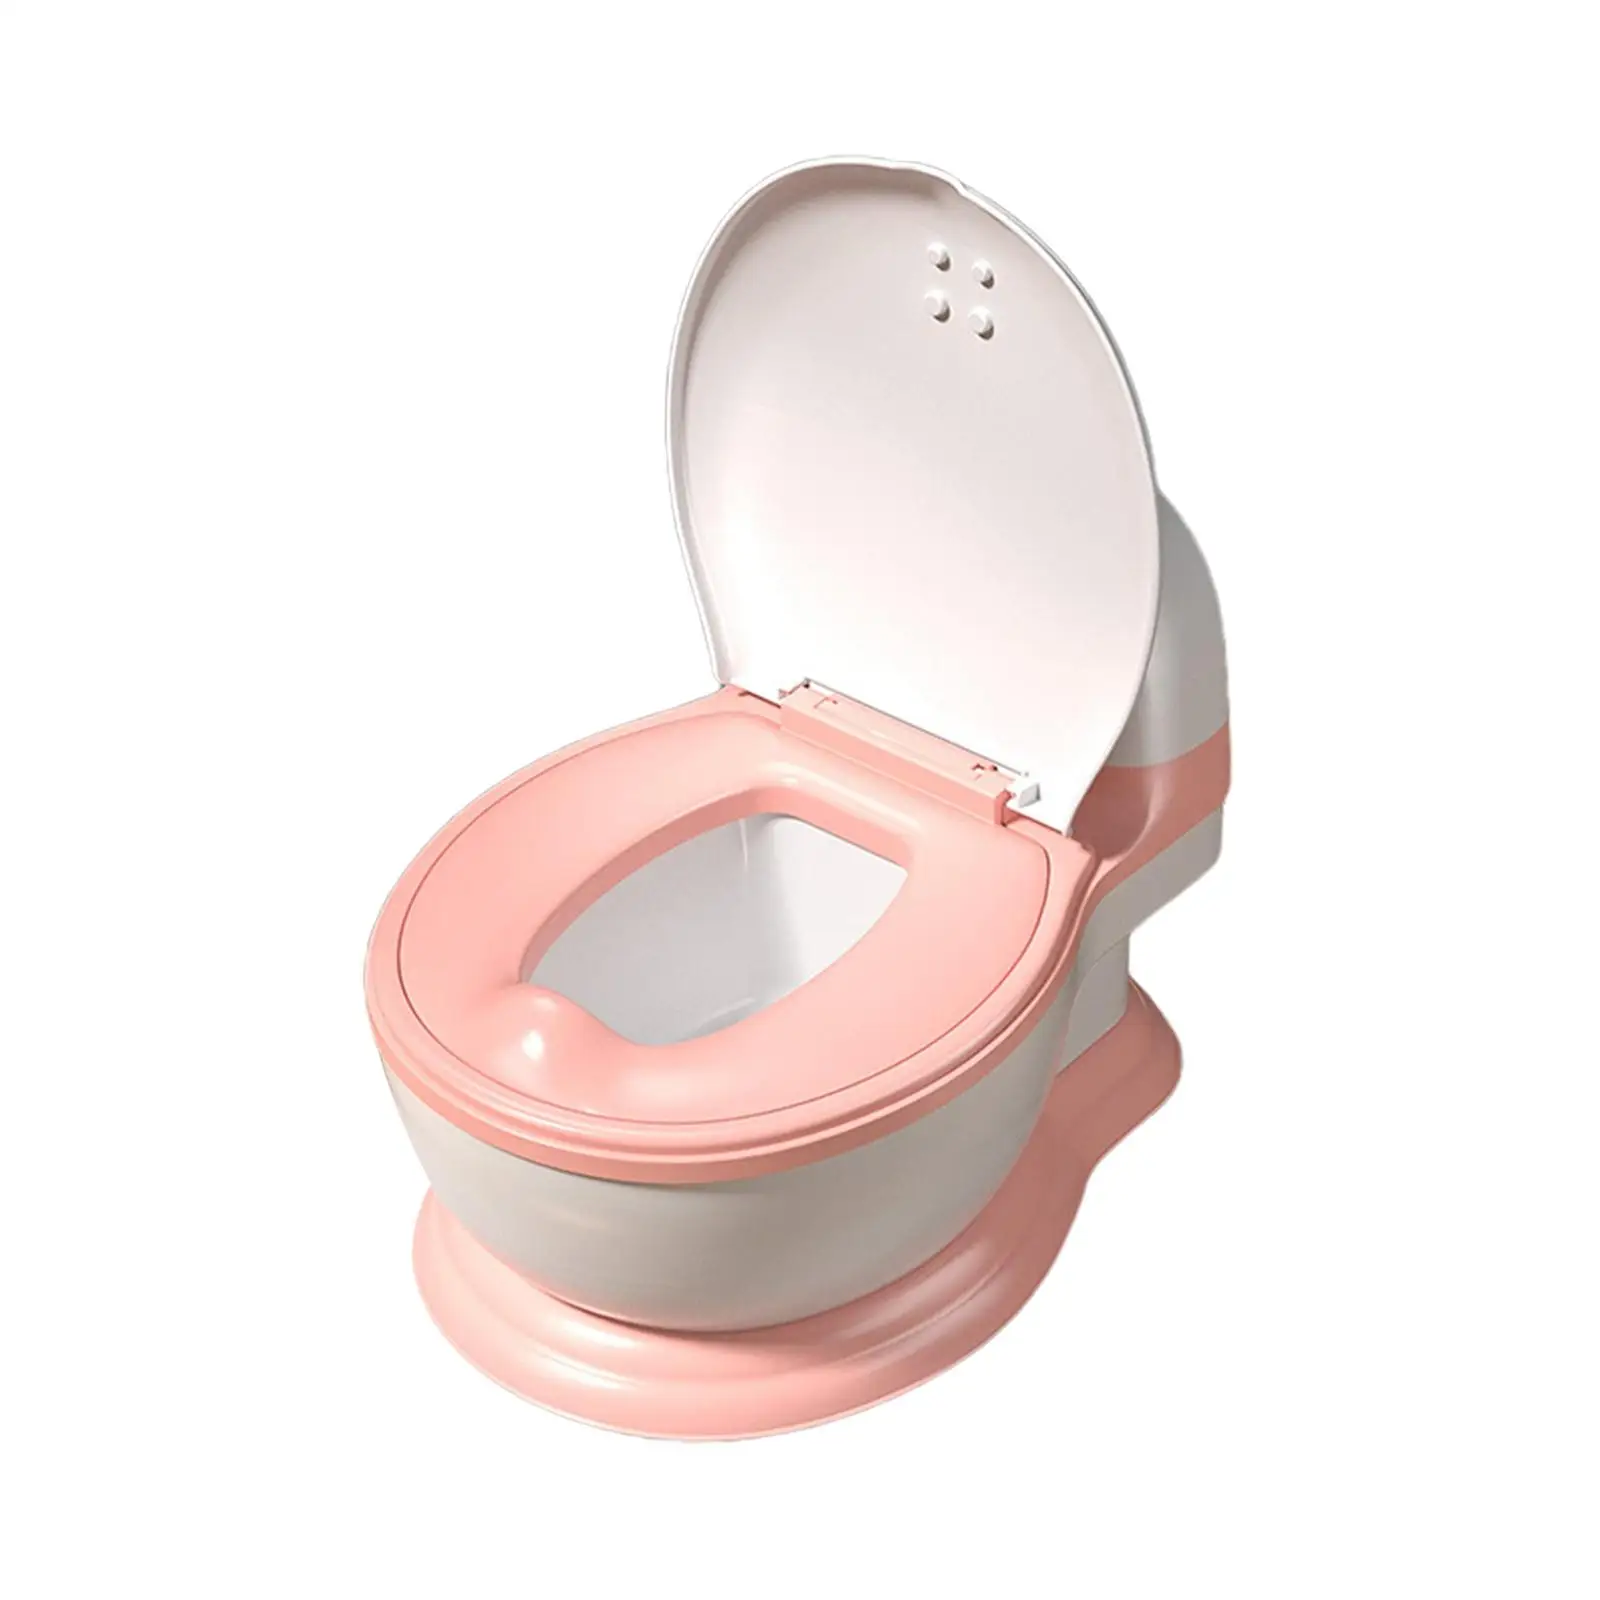 Potty Train Toilet with Pad Comfortable Realistic Training Transition Potty Seat for Kindergarten Indoor Hotel Nursery Boys